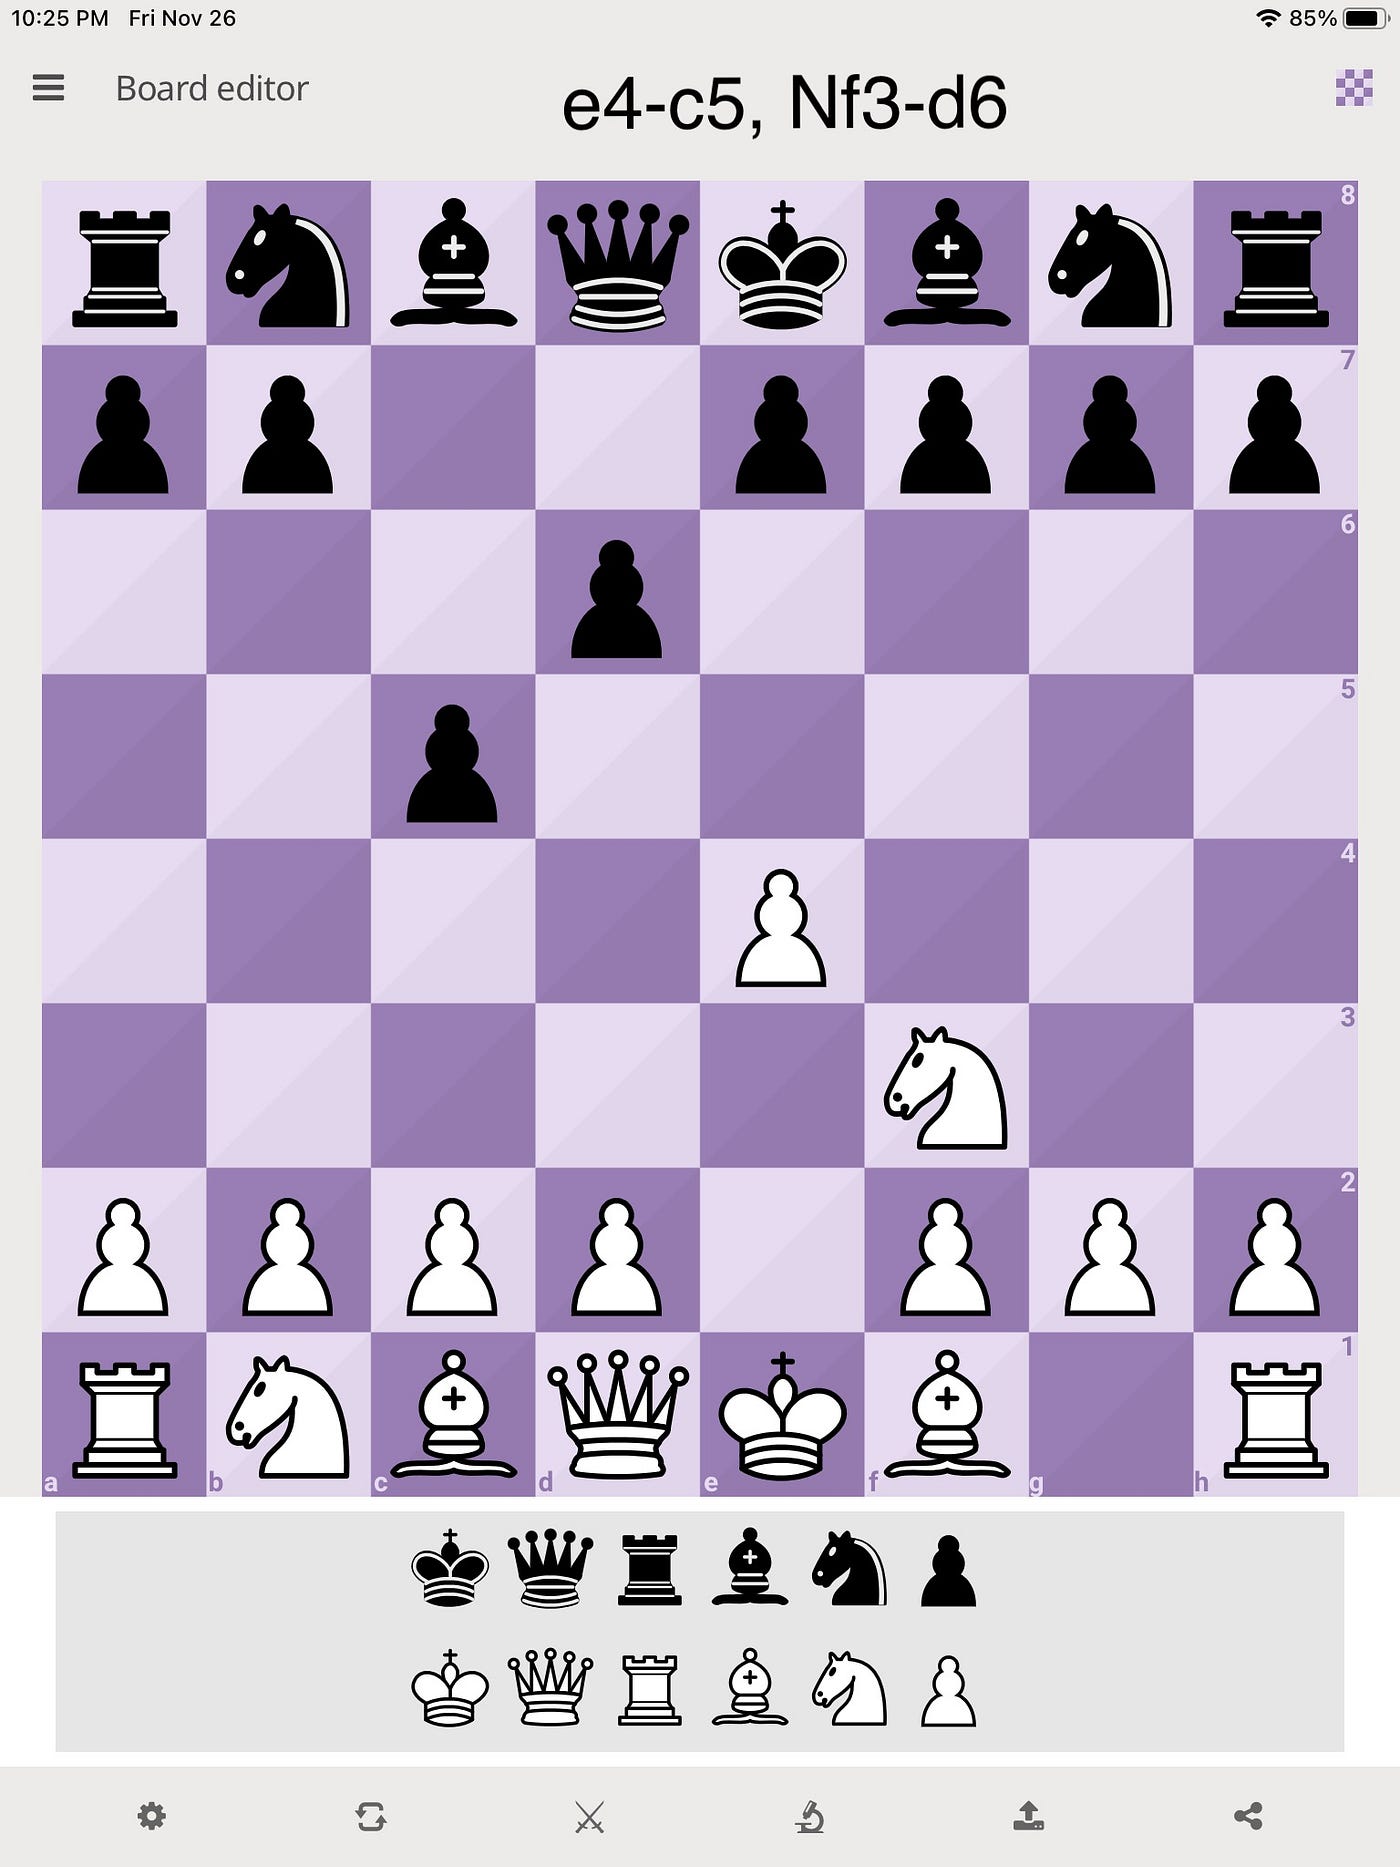 Common Lines in the Sicilian Defense Chess Opening